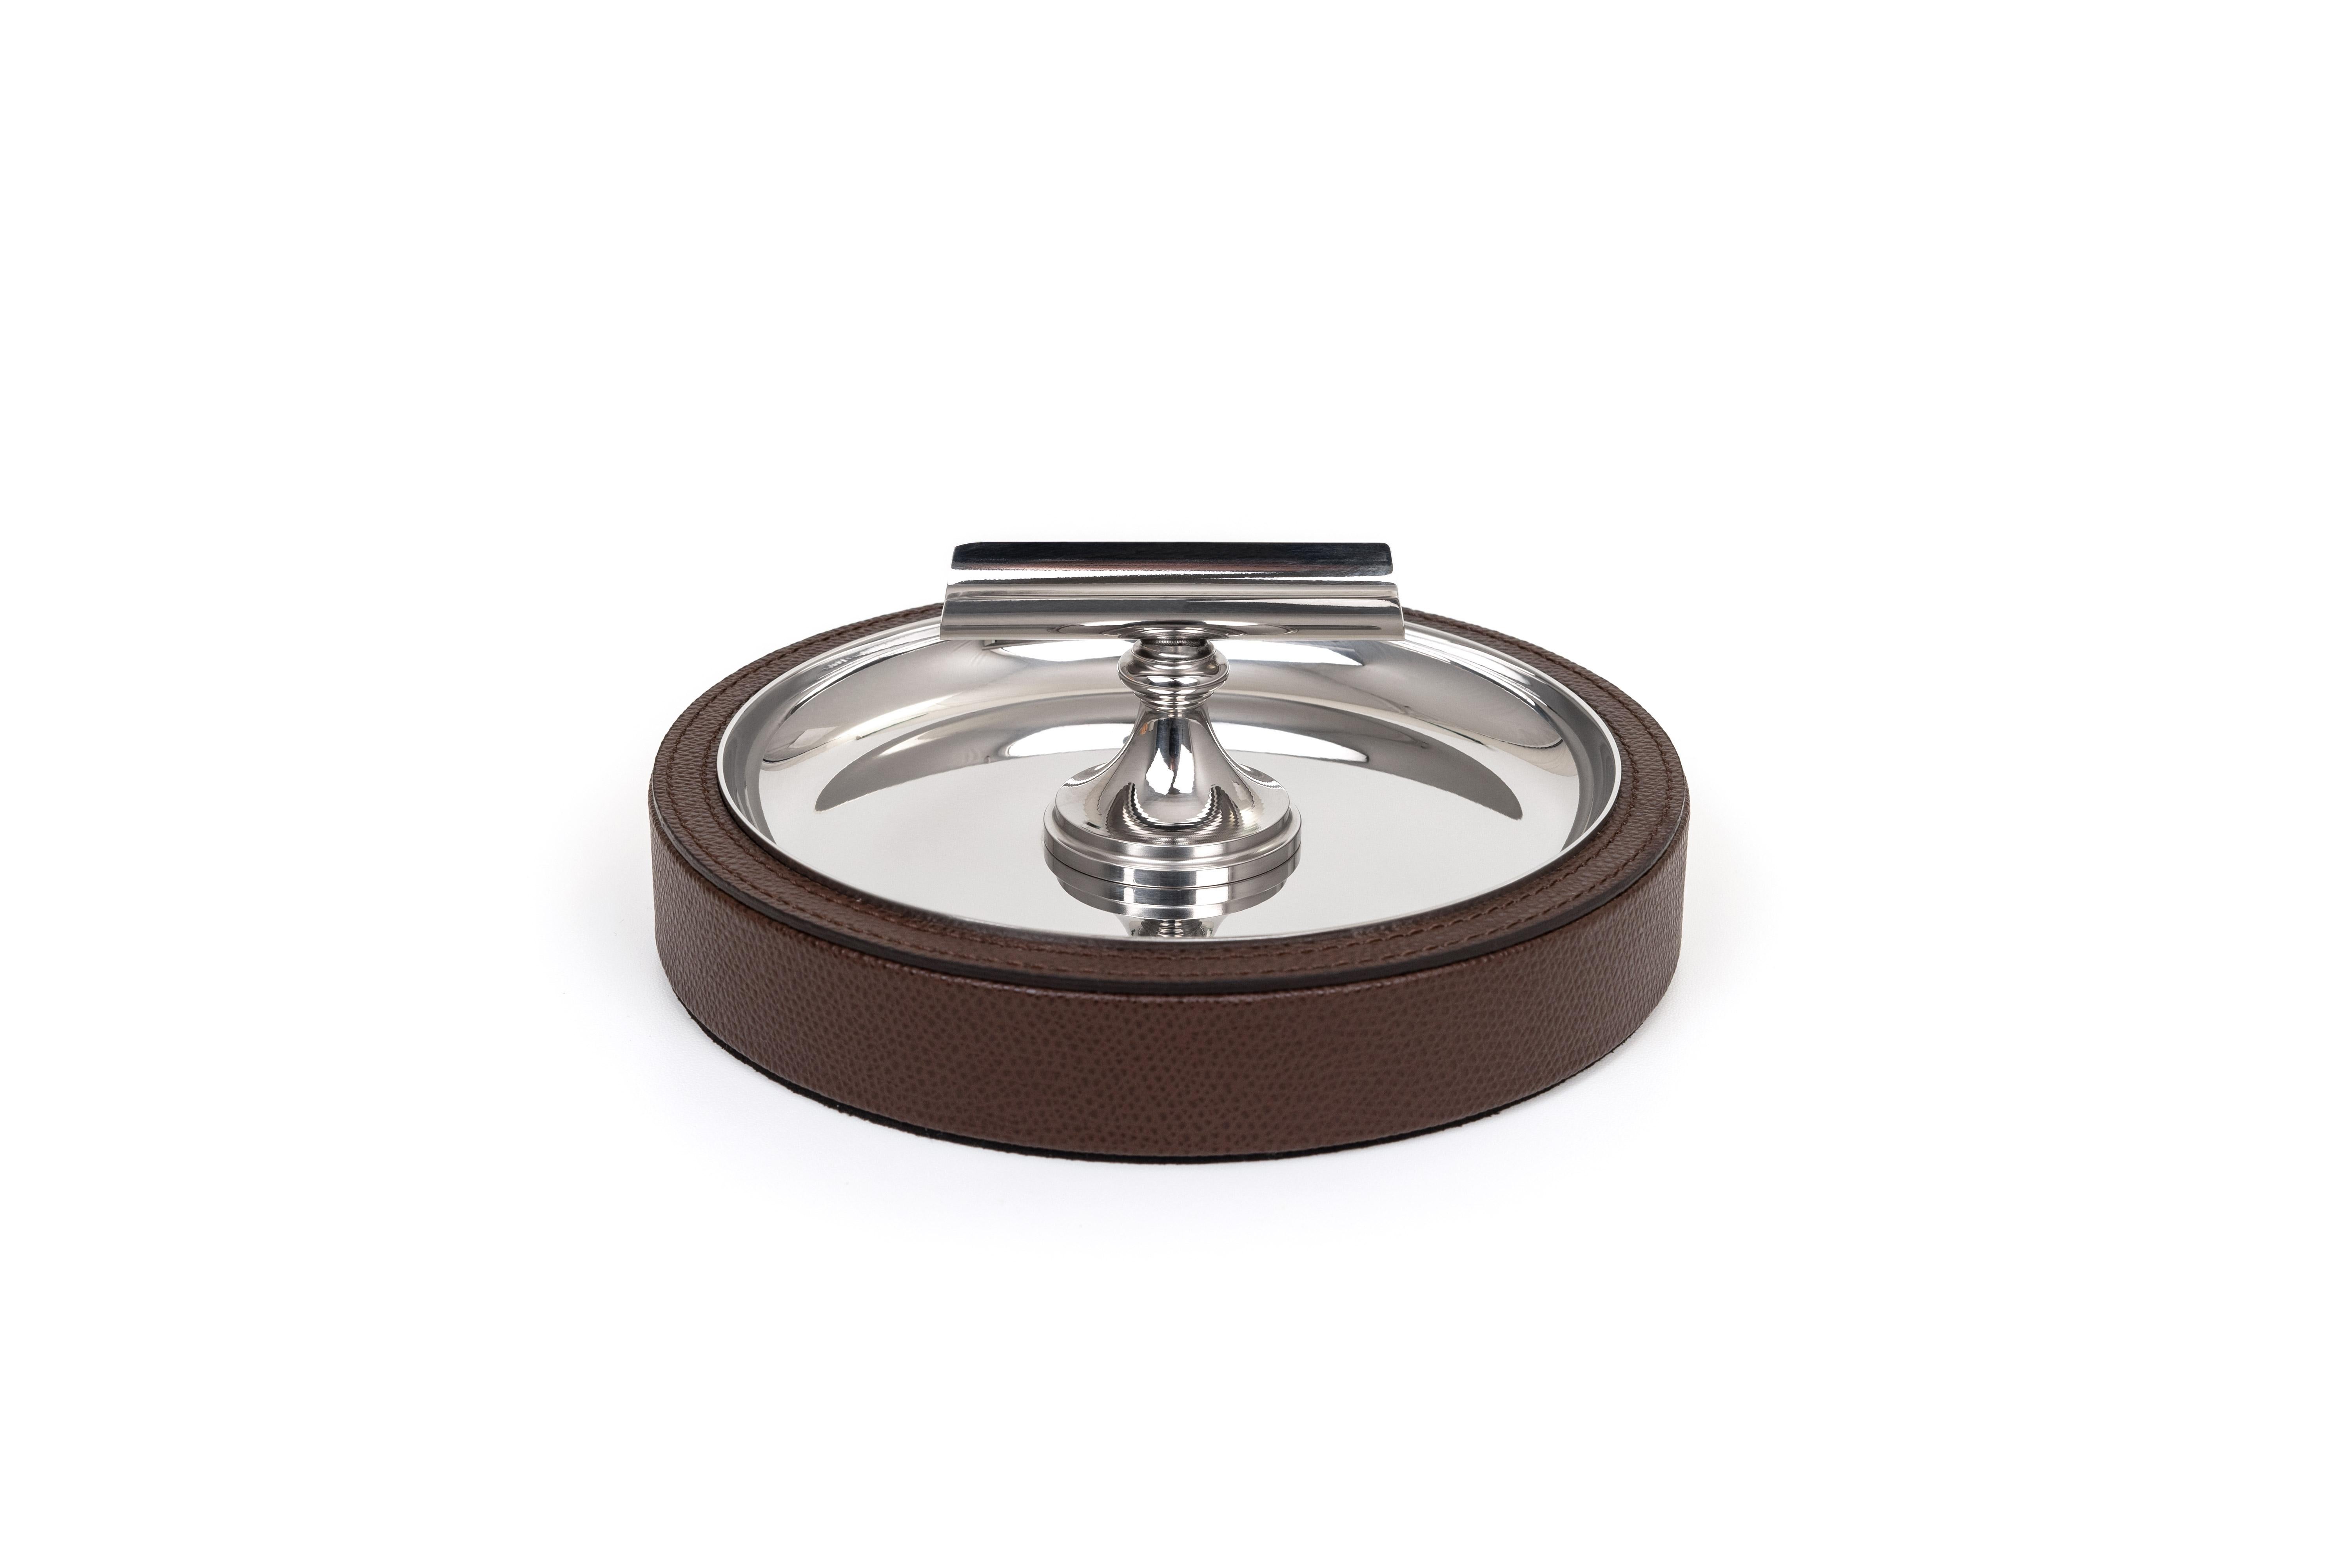 For poker nights. A Compact design with a single cigar rest, this piece serves both as an ashtray and support for the cigar. It is made out of polished steel with a wooden base trimmed with a soft calf leather.

Available with different kinds of